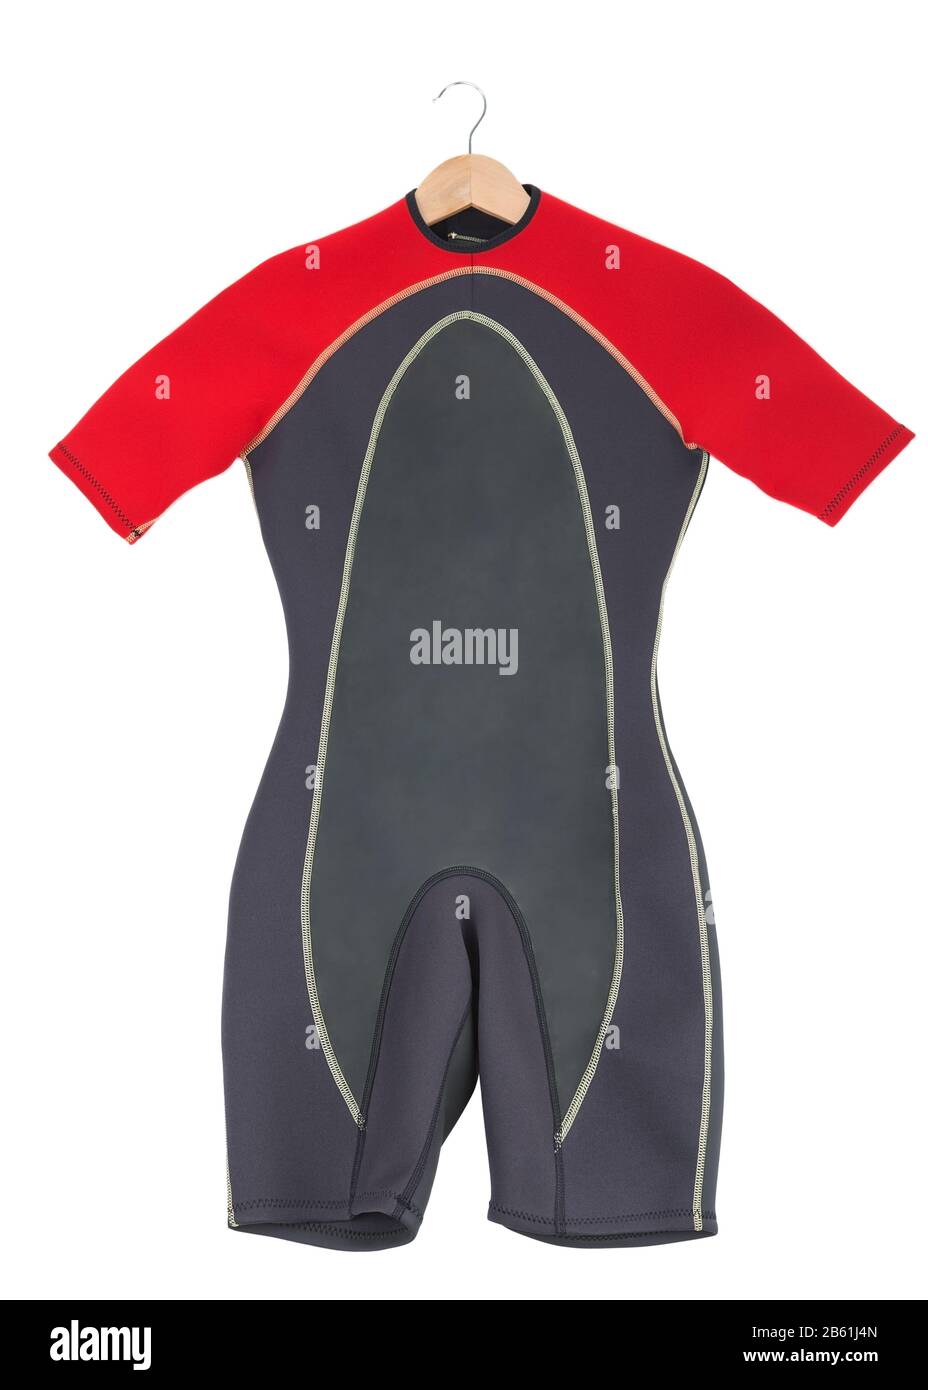 Red wetsuit for surfing. On a white background. Stock Photo